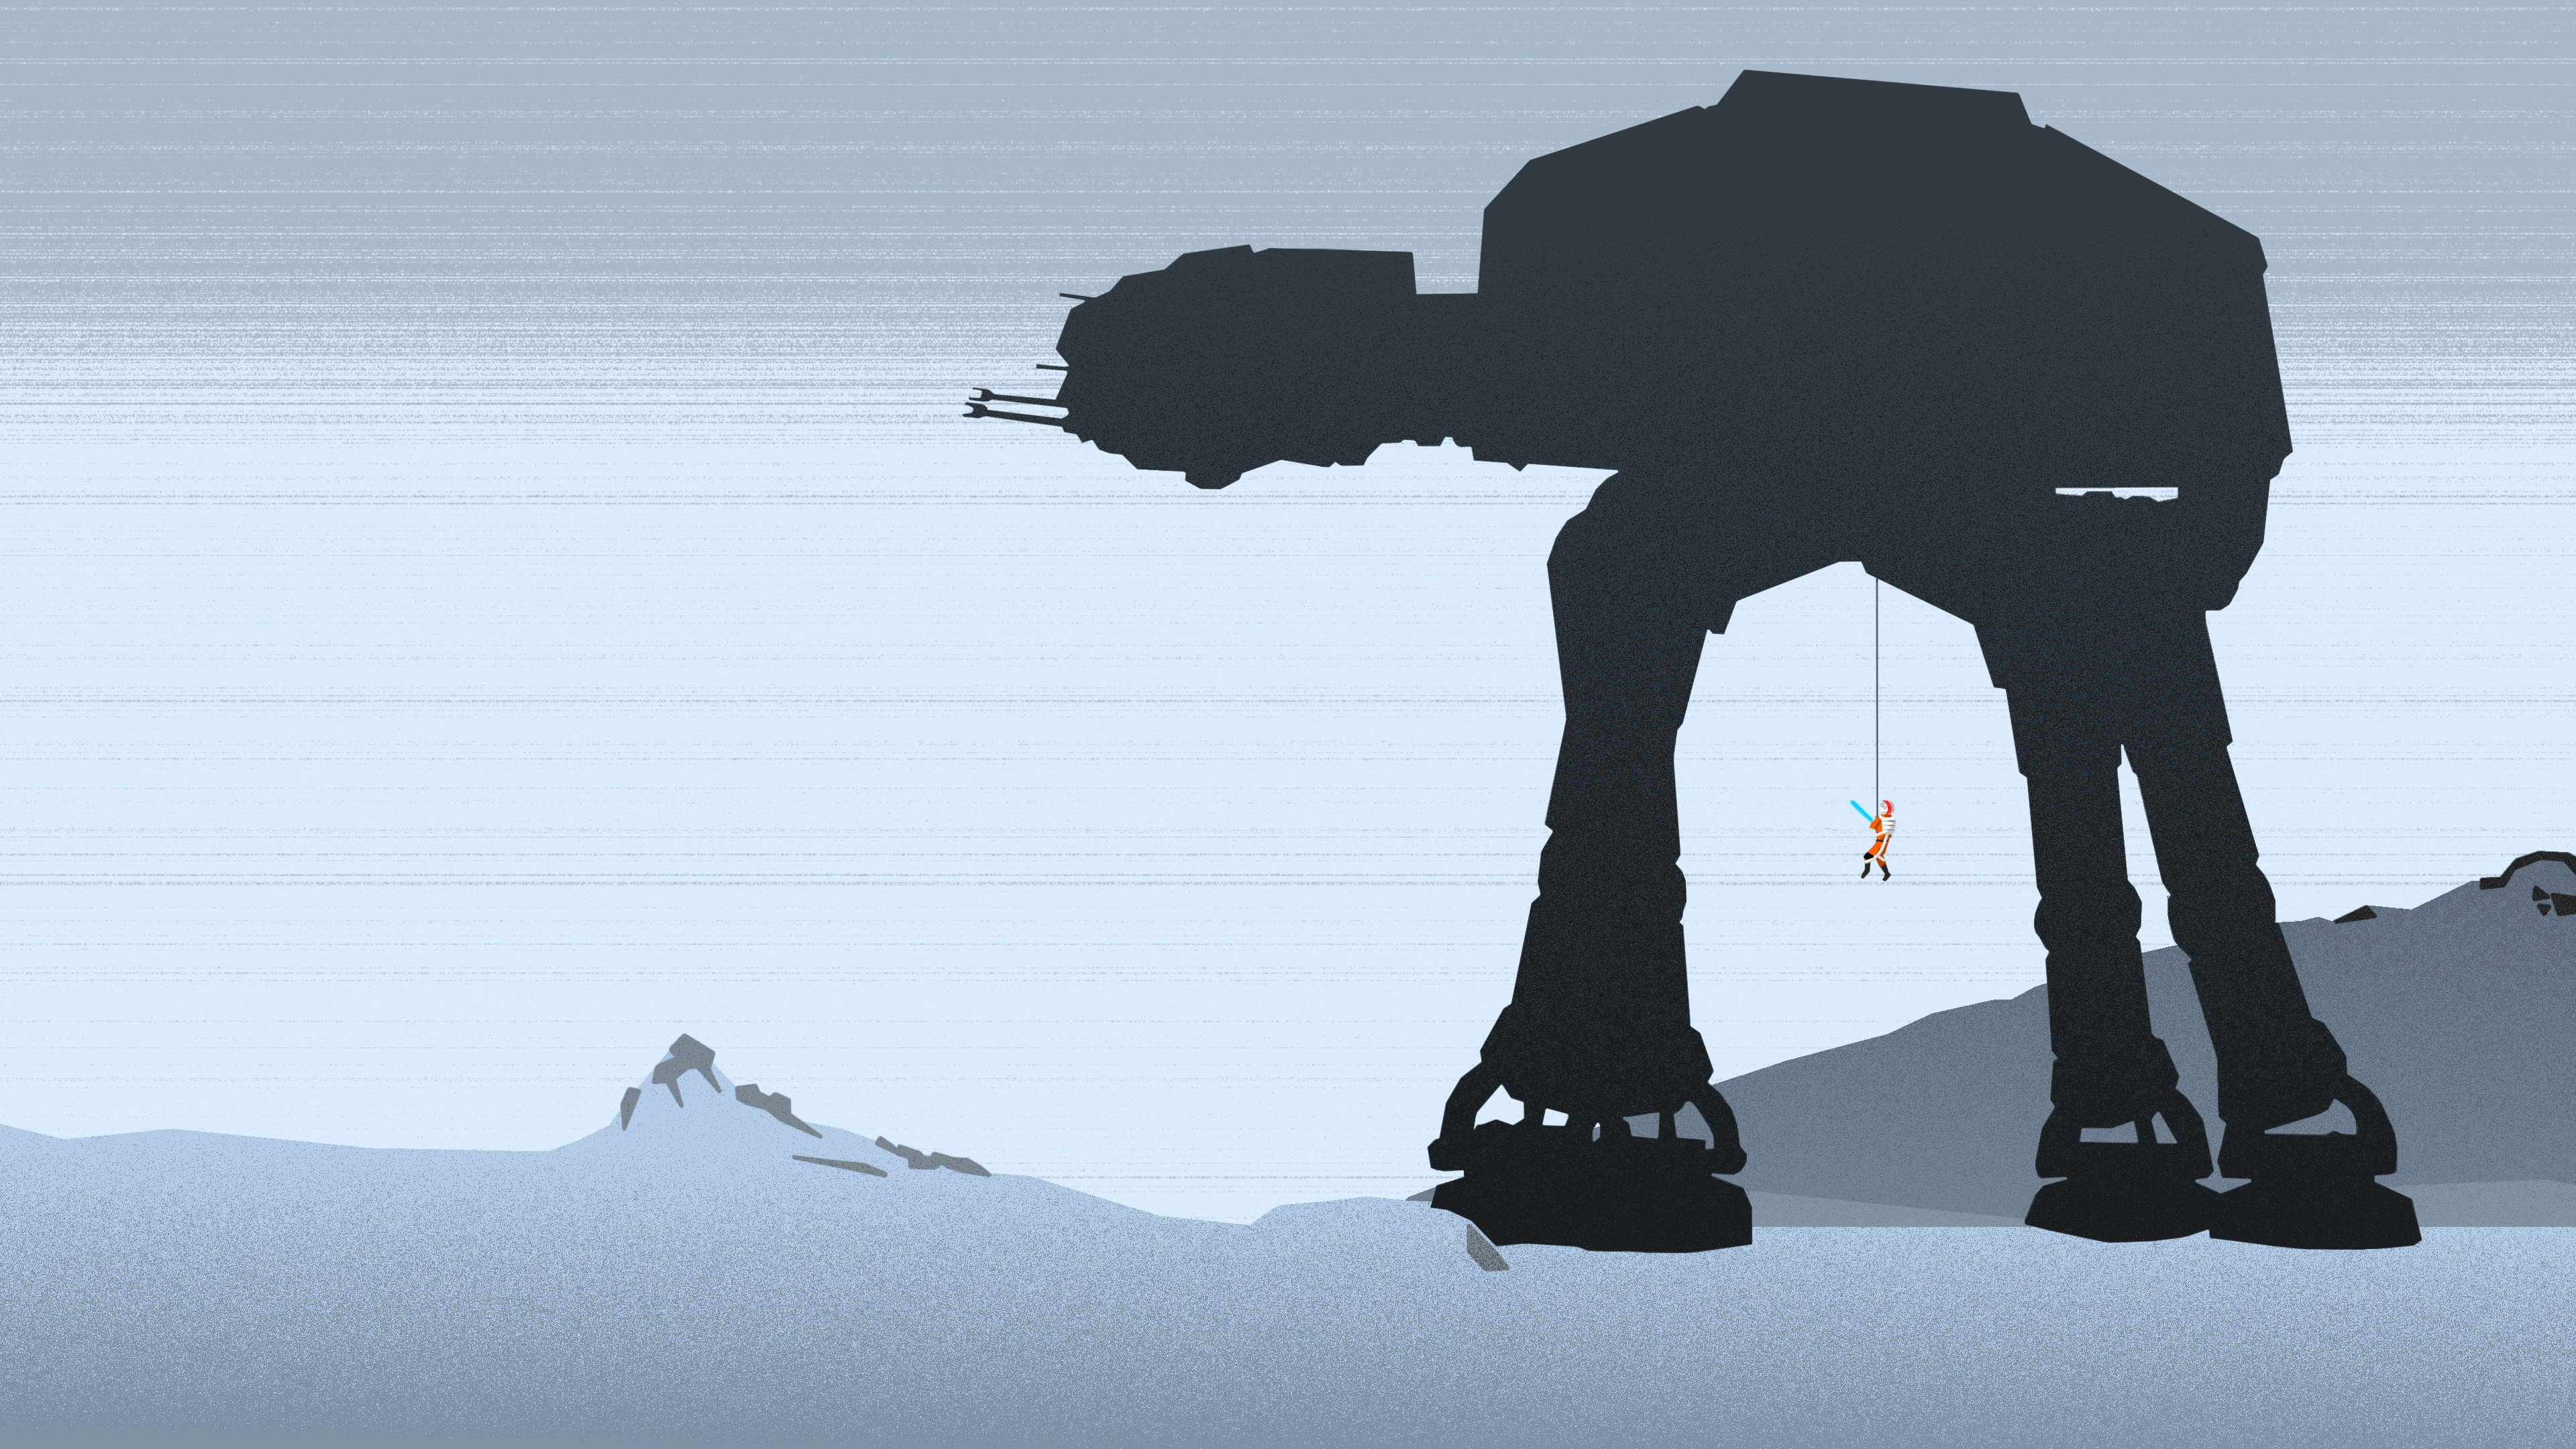 3840x2160 ... The Empire Strikes Back Wallpaper by Zim1112